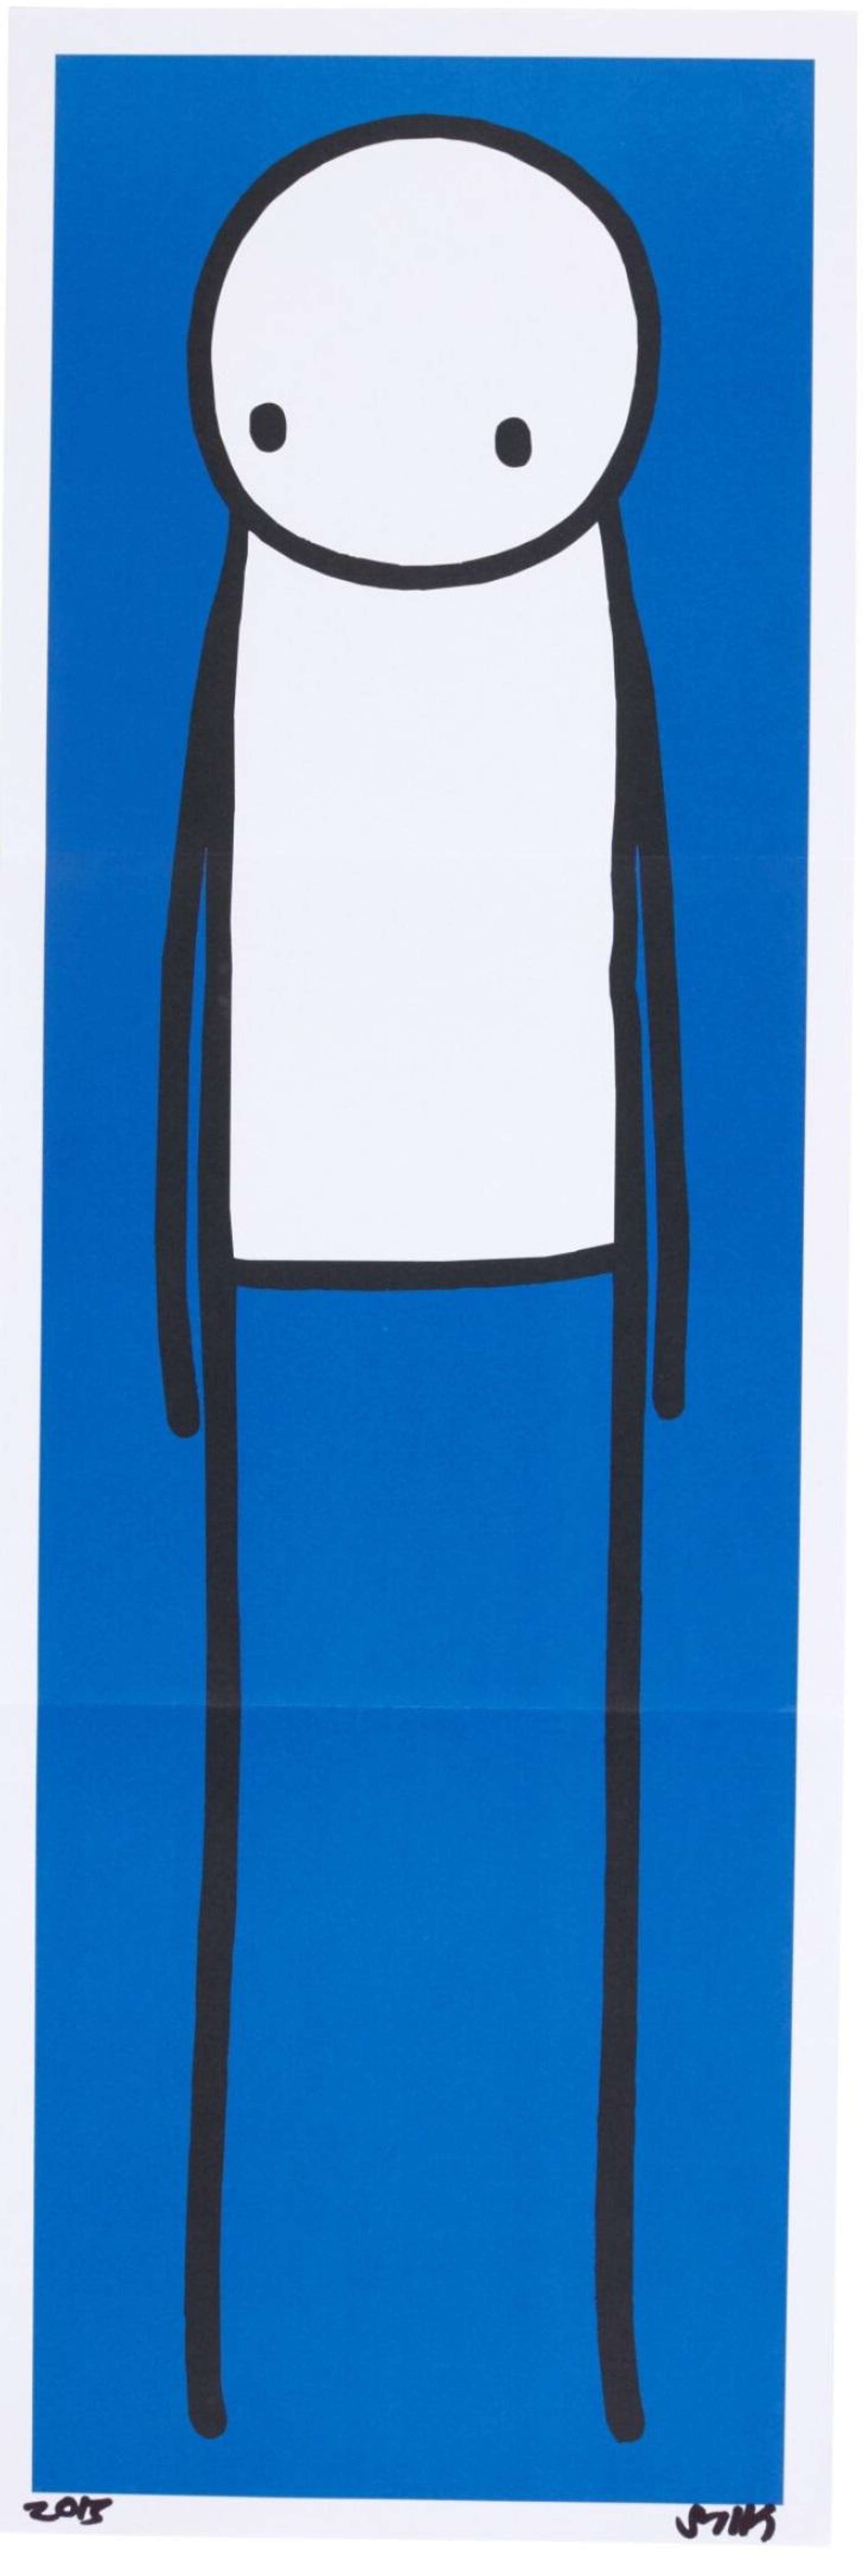 The Big Issue (blue) by Stik